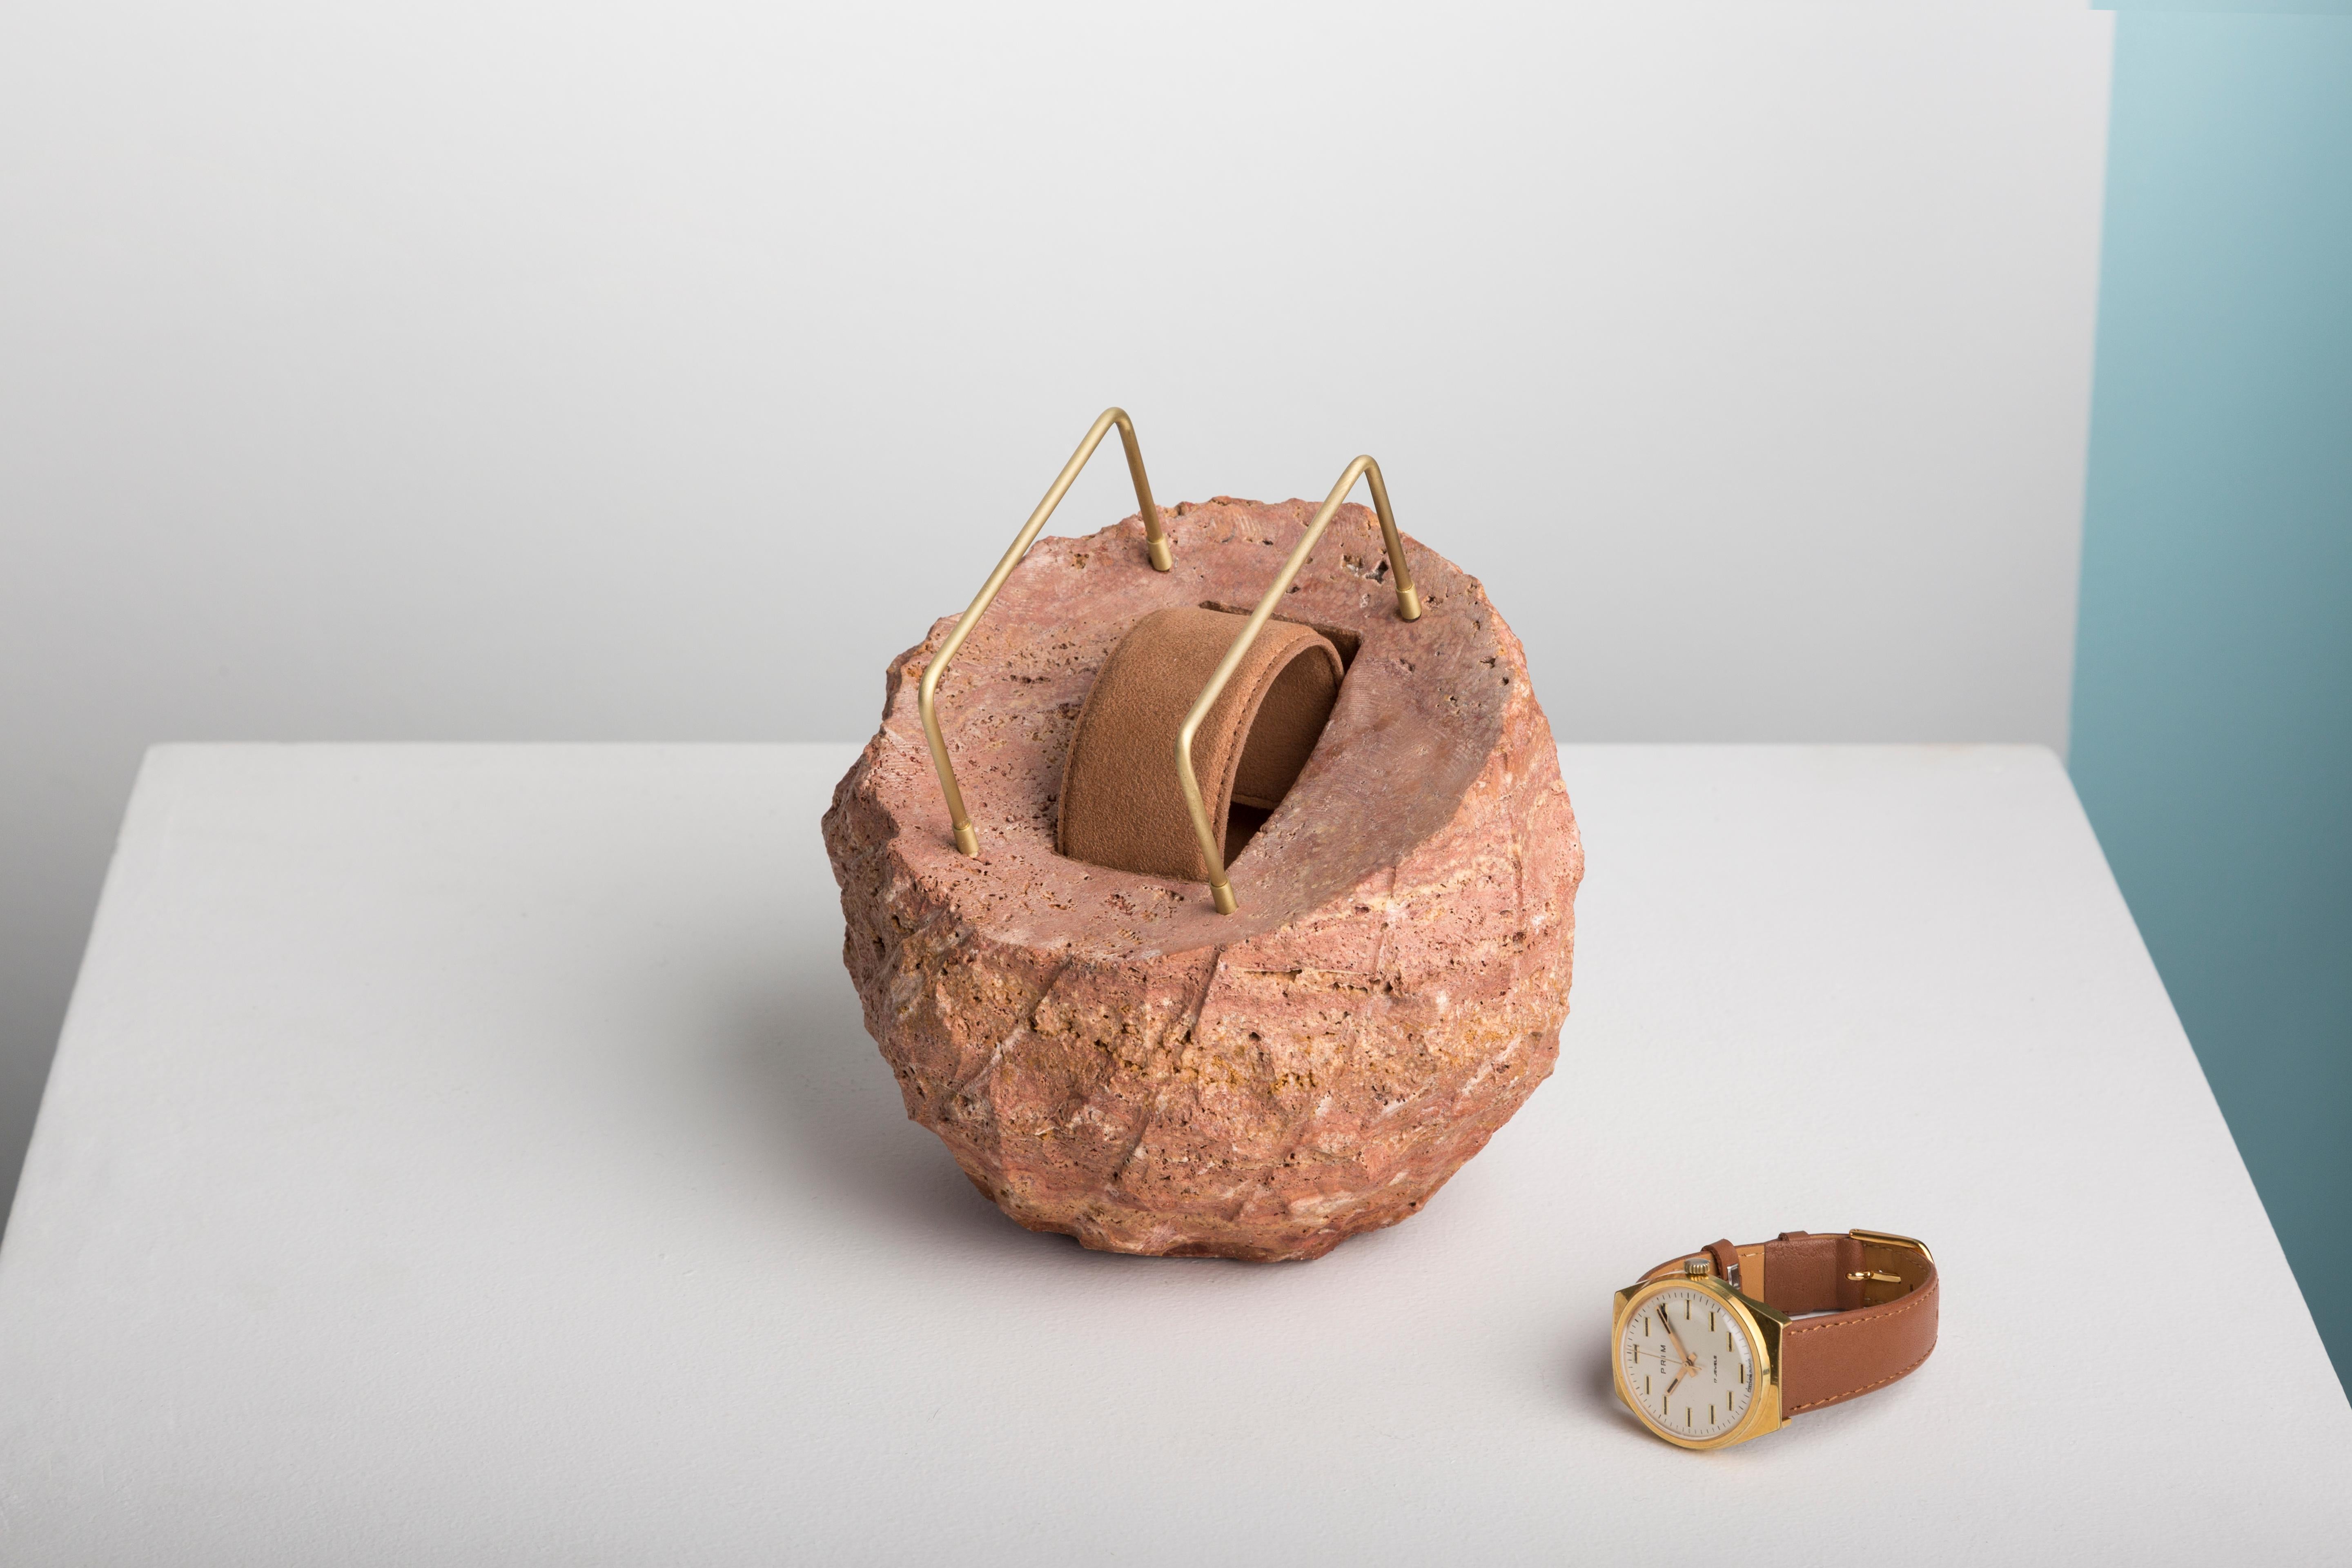 Red Zaman watch stand by T Sakhi Studio
Materials: Red travertino, brass, suede
Dimensions: W 20 cm, H 20 cm

The craftsmanship emphasizes various cultural heritages; leather and metal in Lebanon and stone and minerals in Egypt, where was the